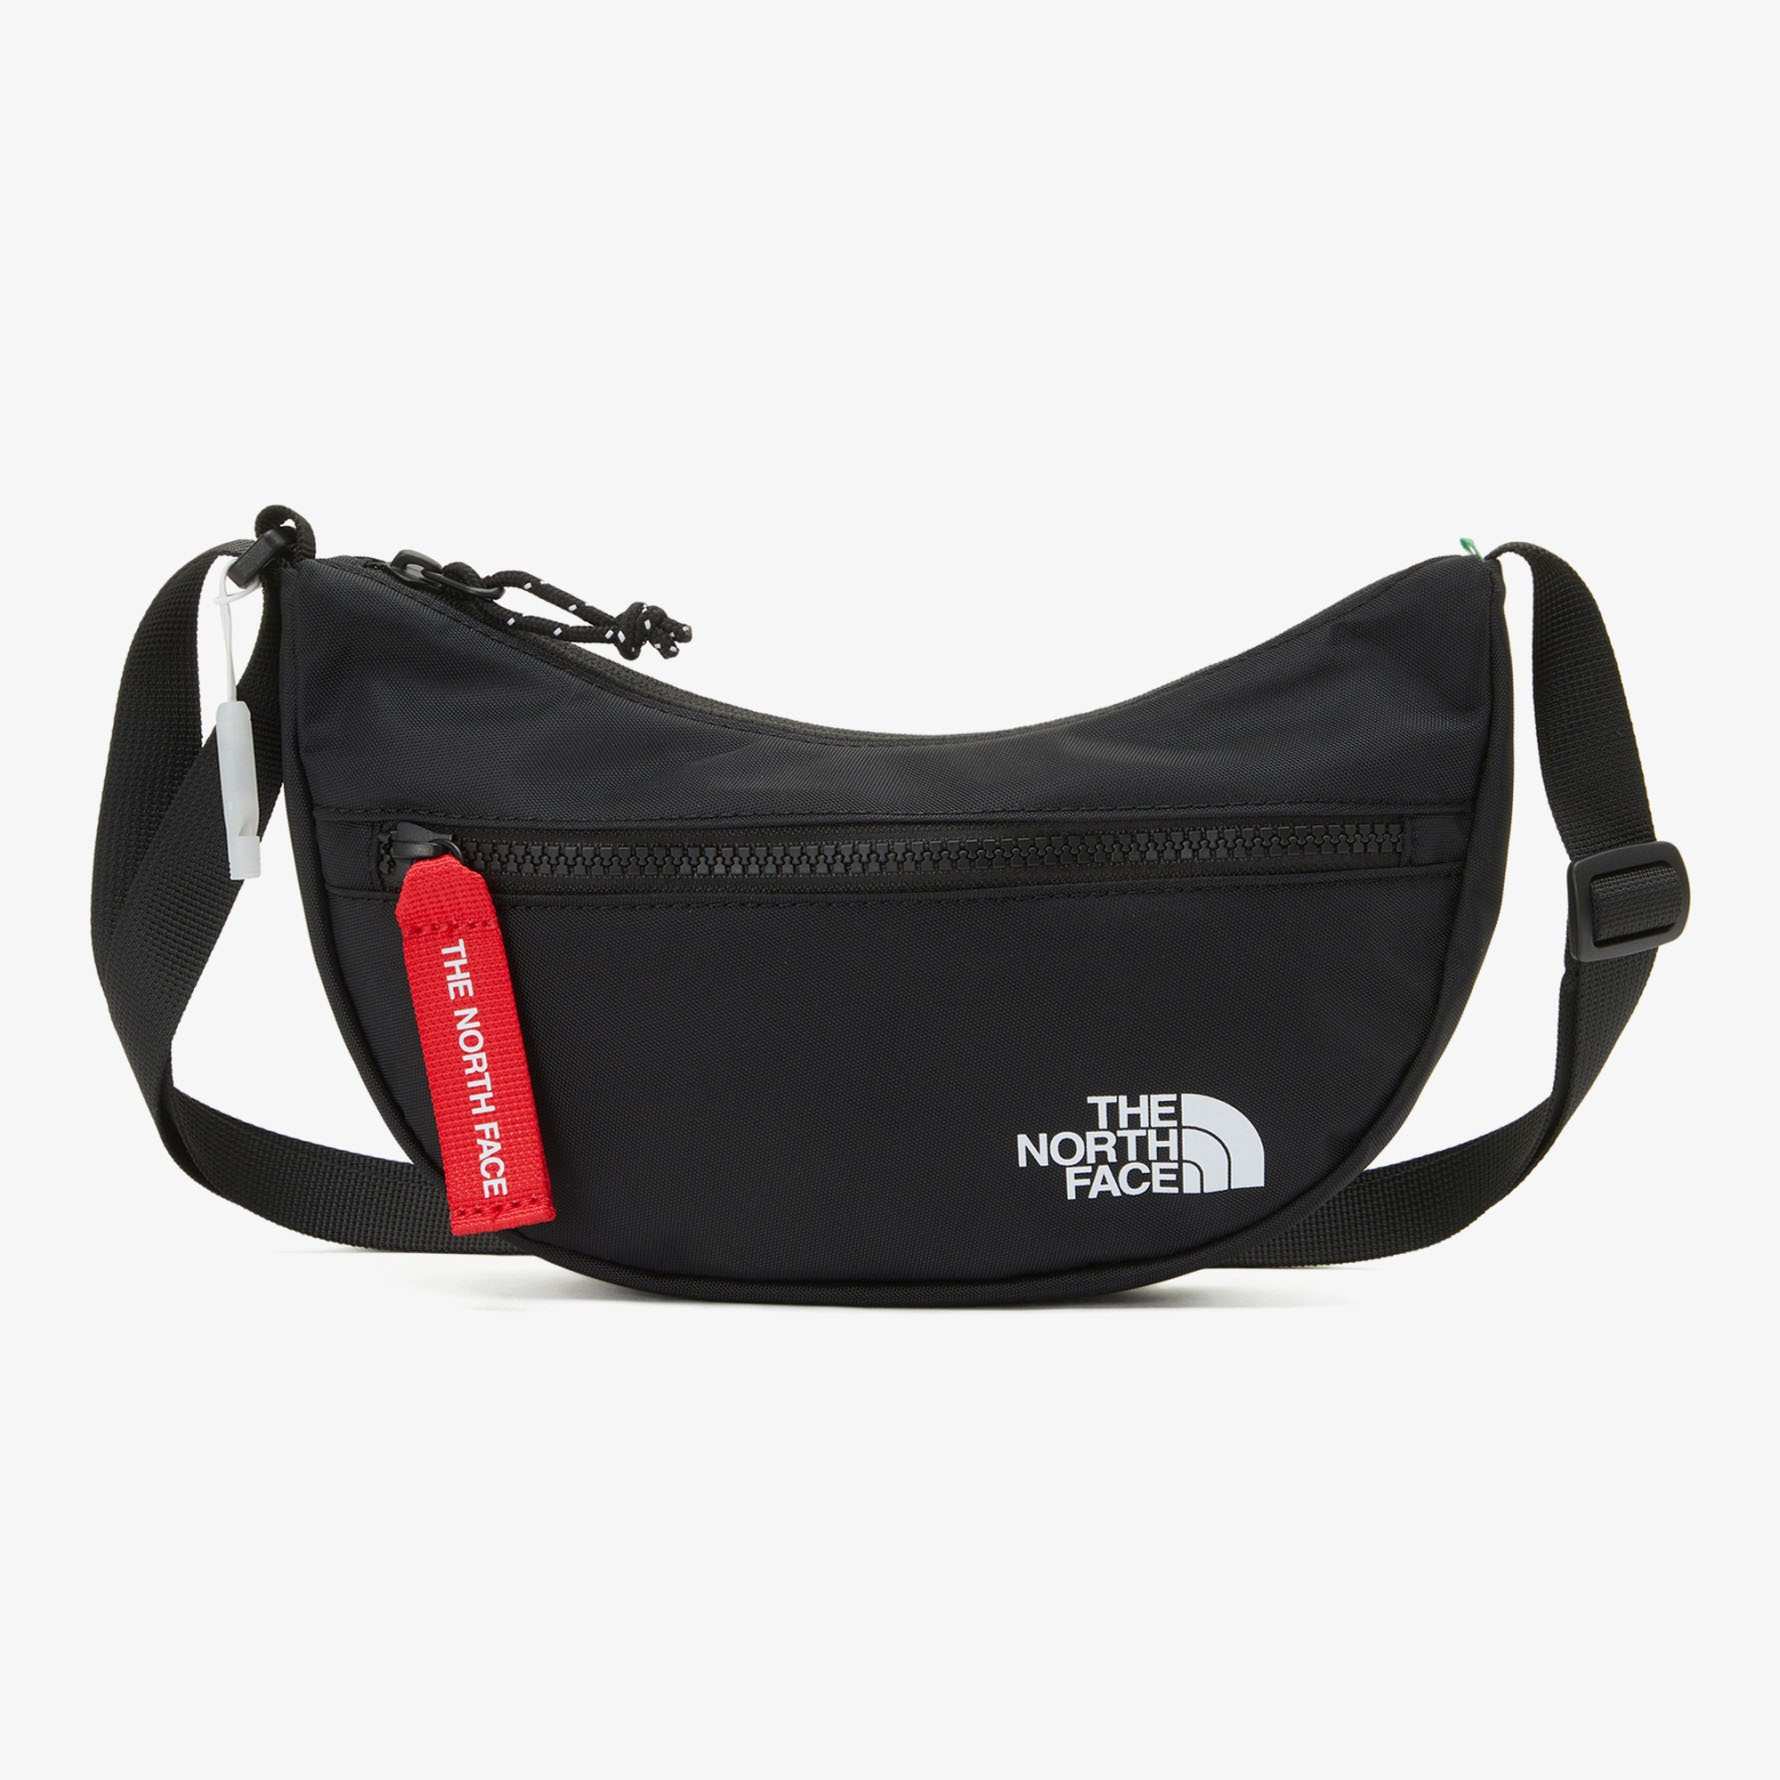 THE NORTH FACE キッズ ウエストポーチ KIDS ROUND CROSS BAG BL...